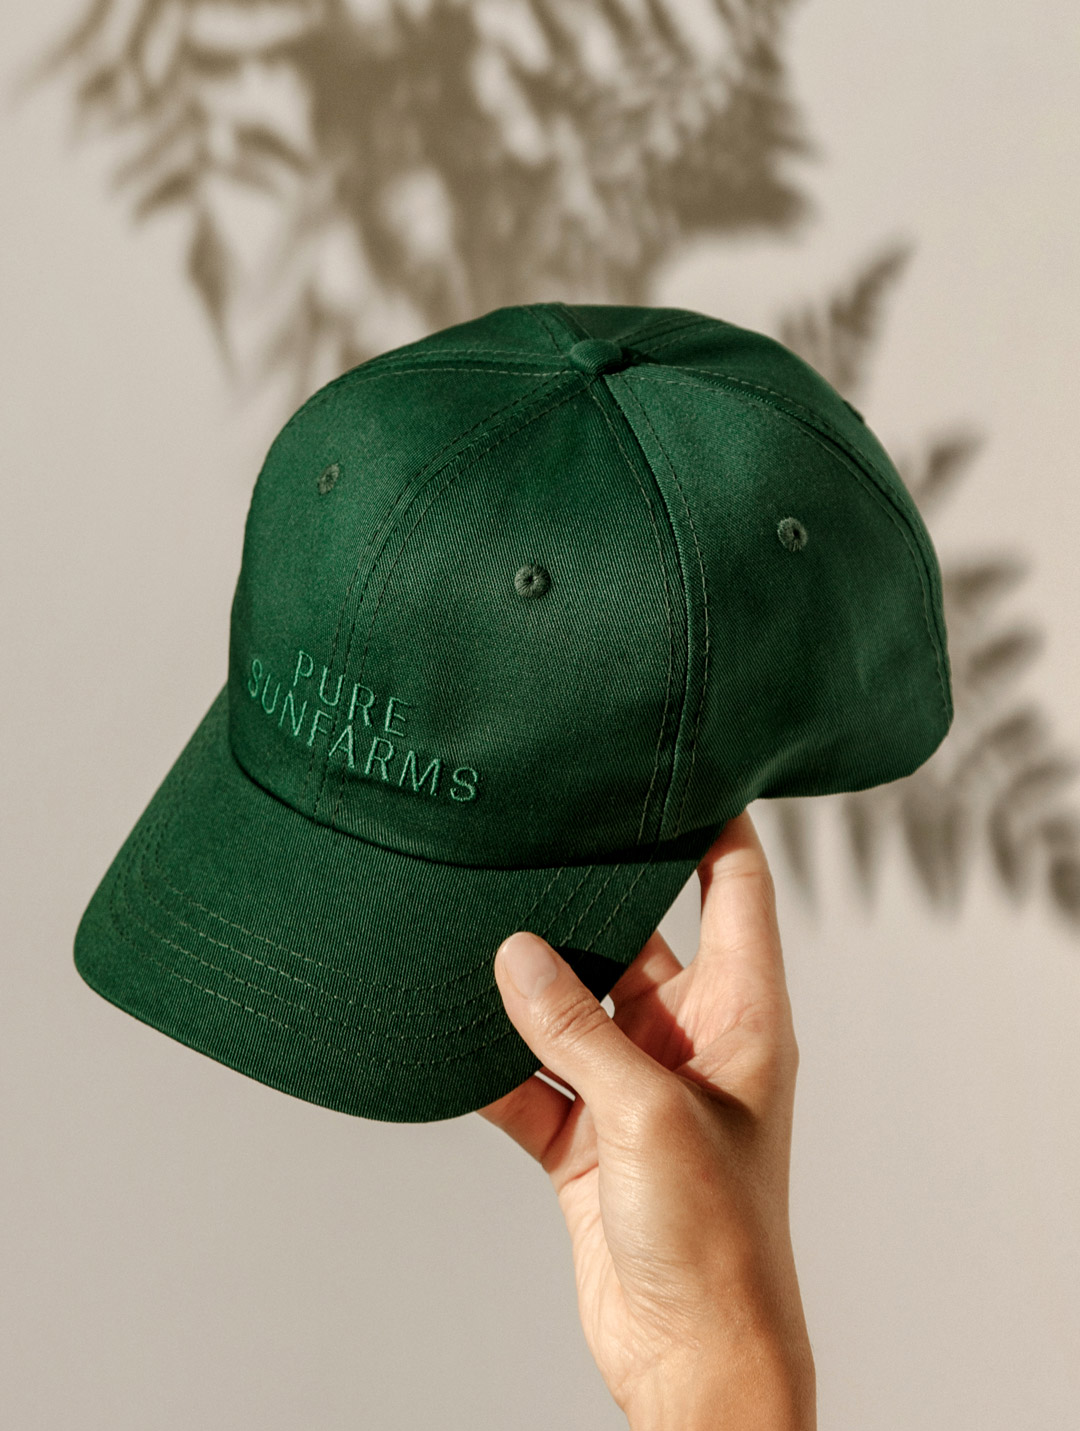 green baseball cap with embroidered "Pure Sunfarms" text.